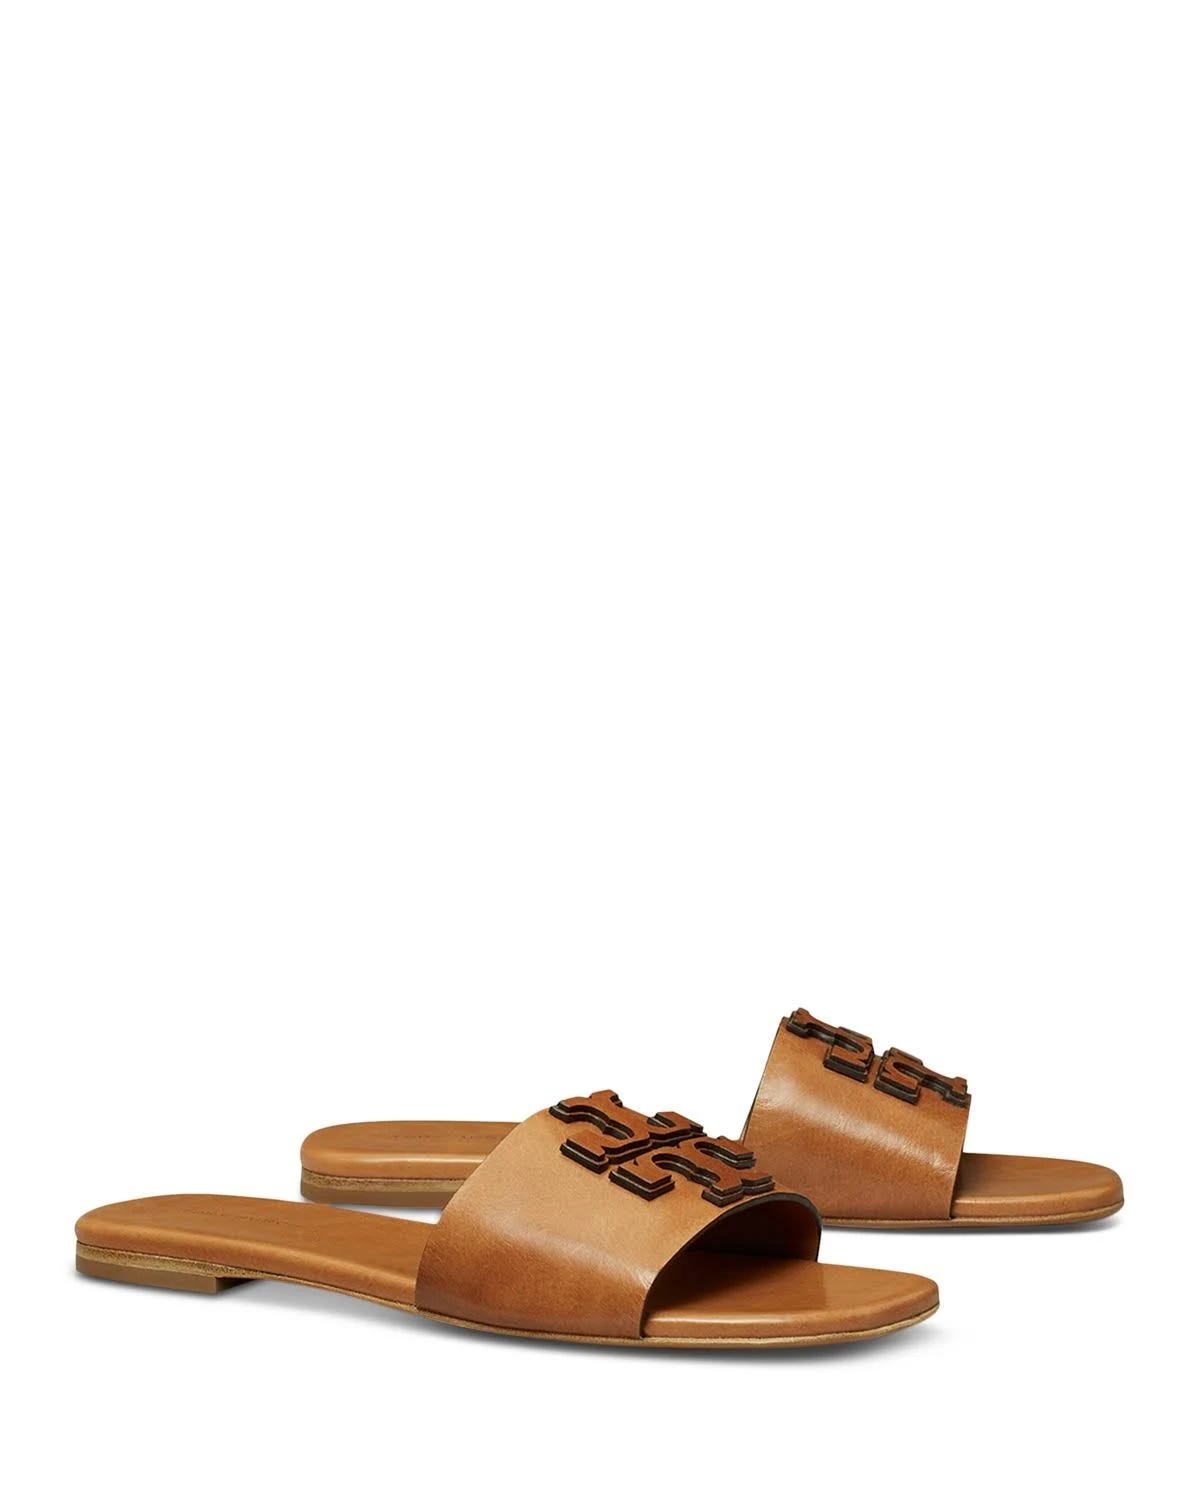 Tory Burch Ines Slide Tan Sandals - Comfortable Fashion for Women | Image